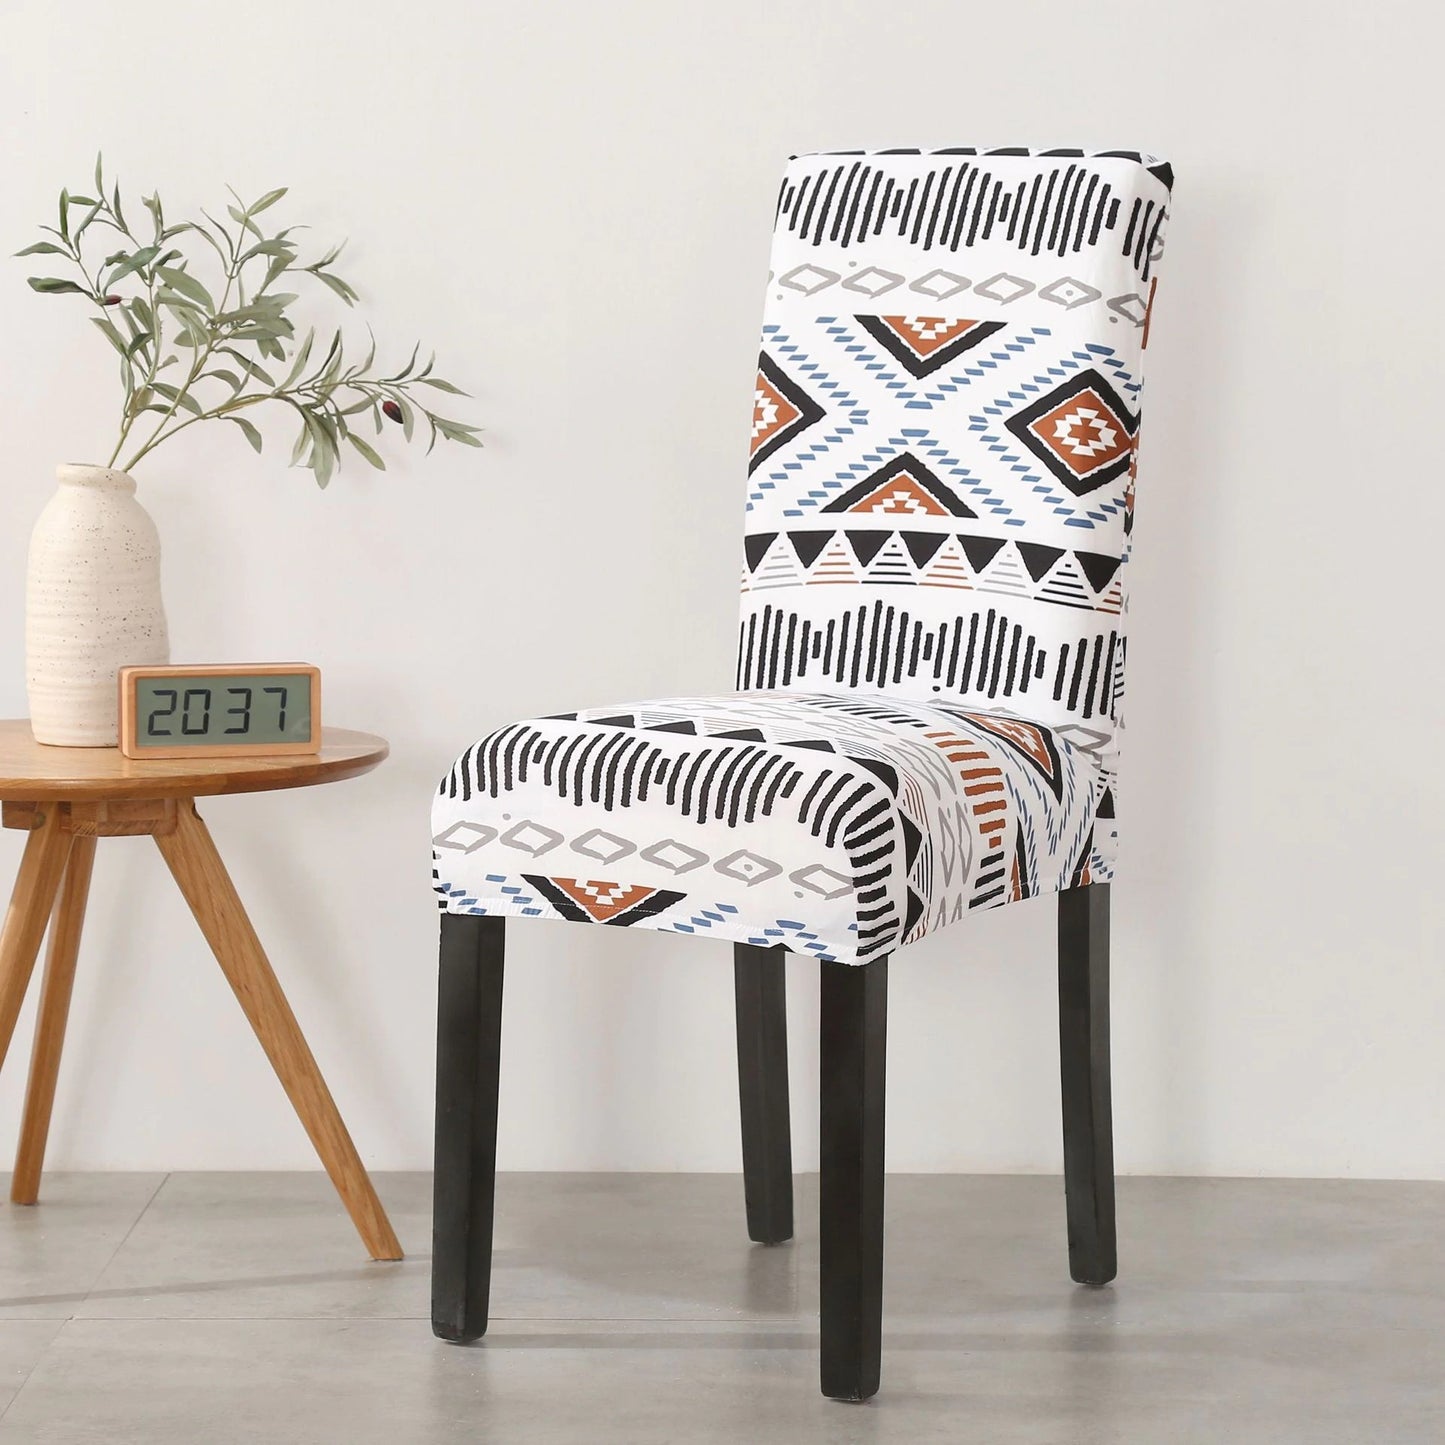 Elastic stool covers in different patterns 3